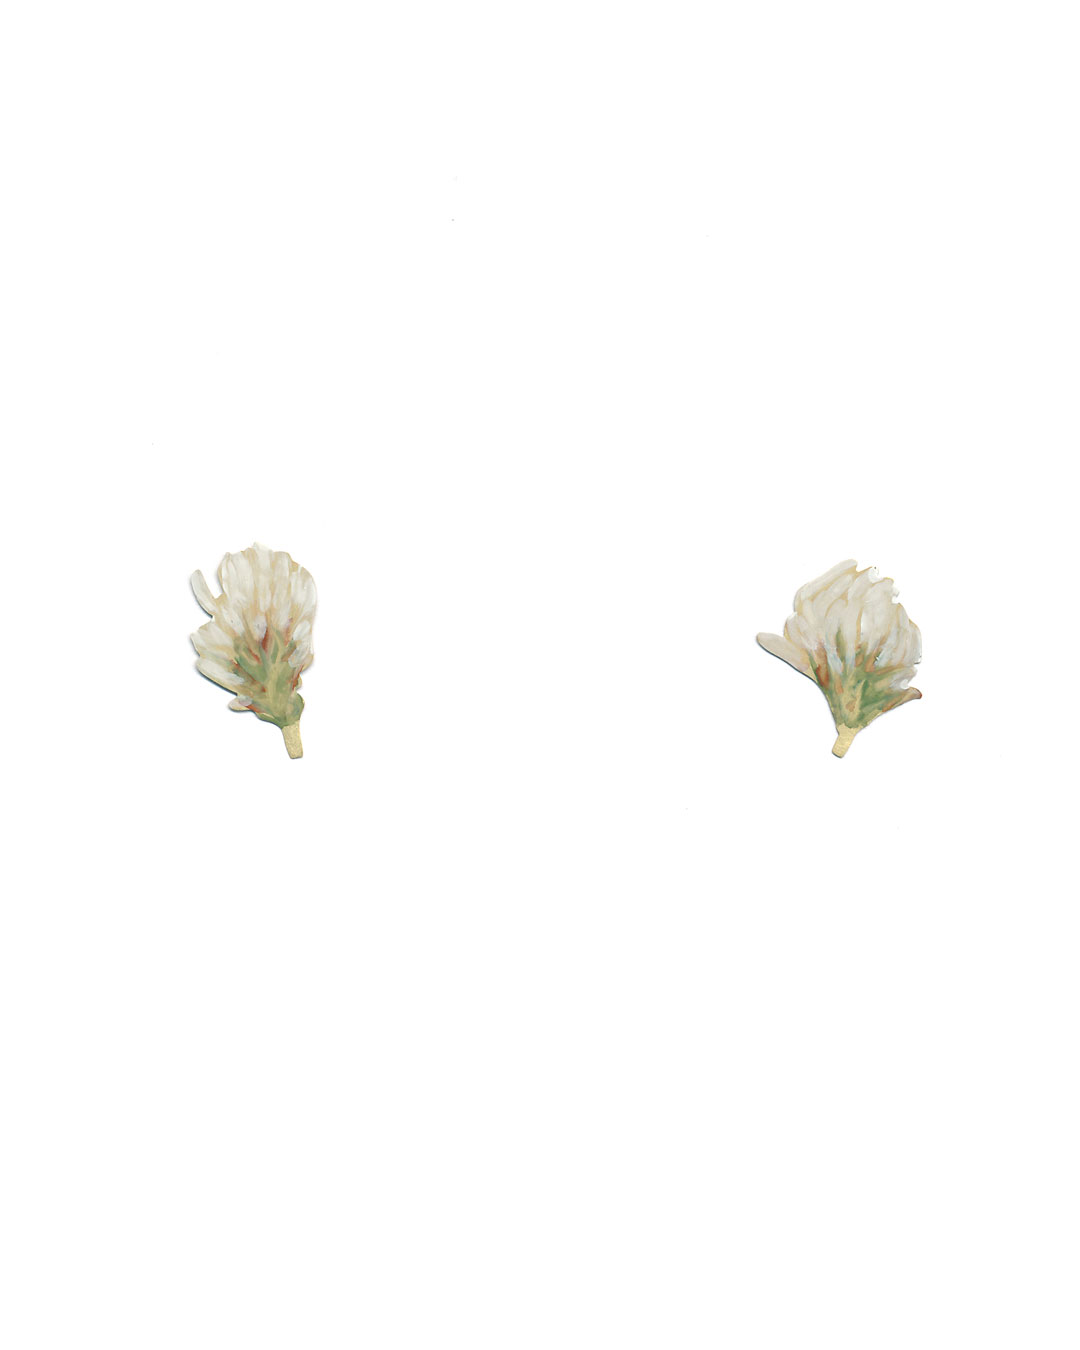 Christopher Thompson Royds, White Clover, 2019, earrings; 18ct gold, hand-painted, diamonds, 22 x 19 mm, €1150